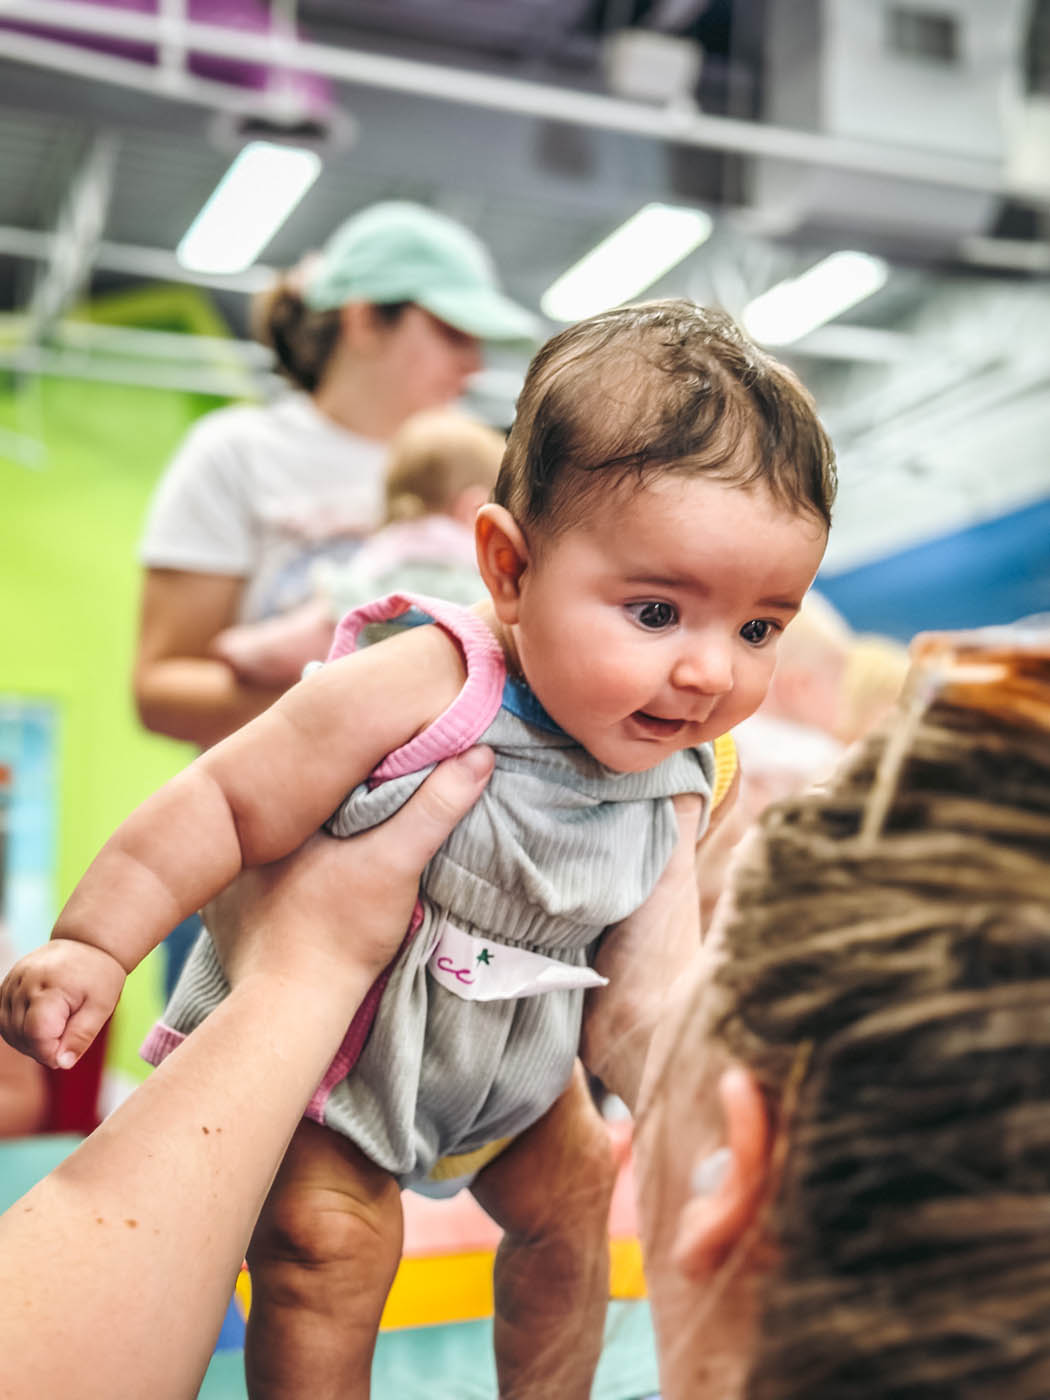 A baby being held in the air at Romp n' Roll West End's classes for babies in Glen Allen, VA